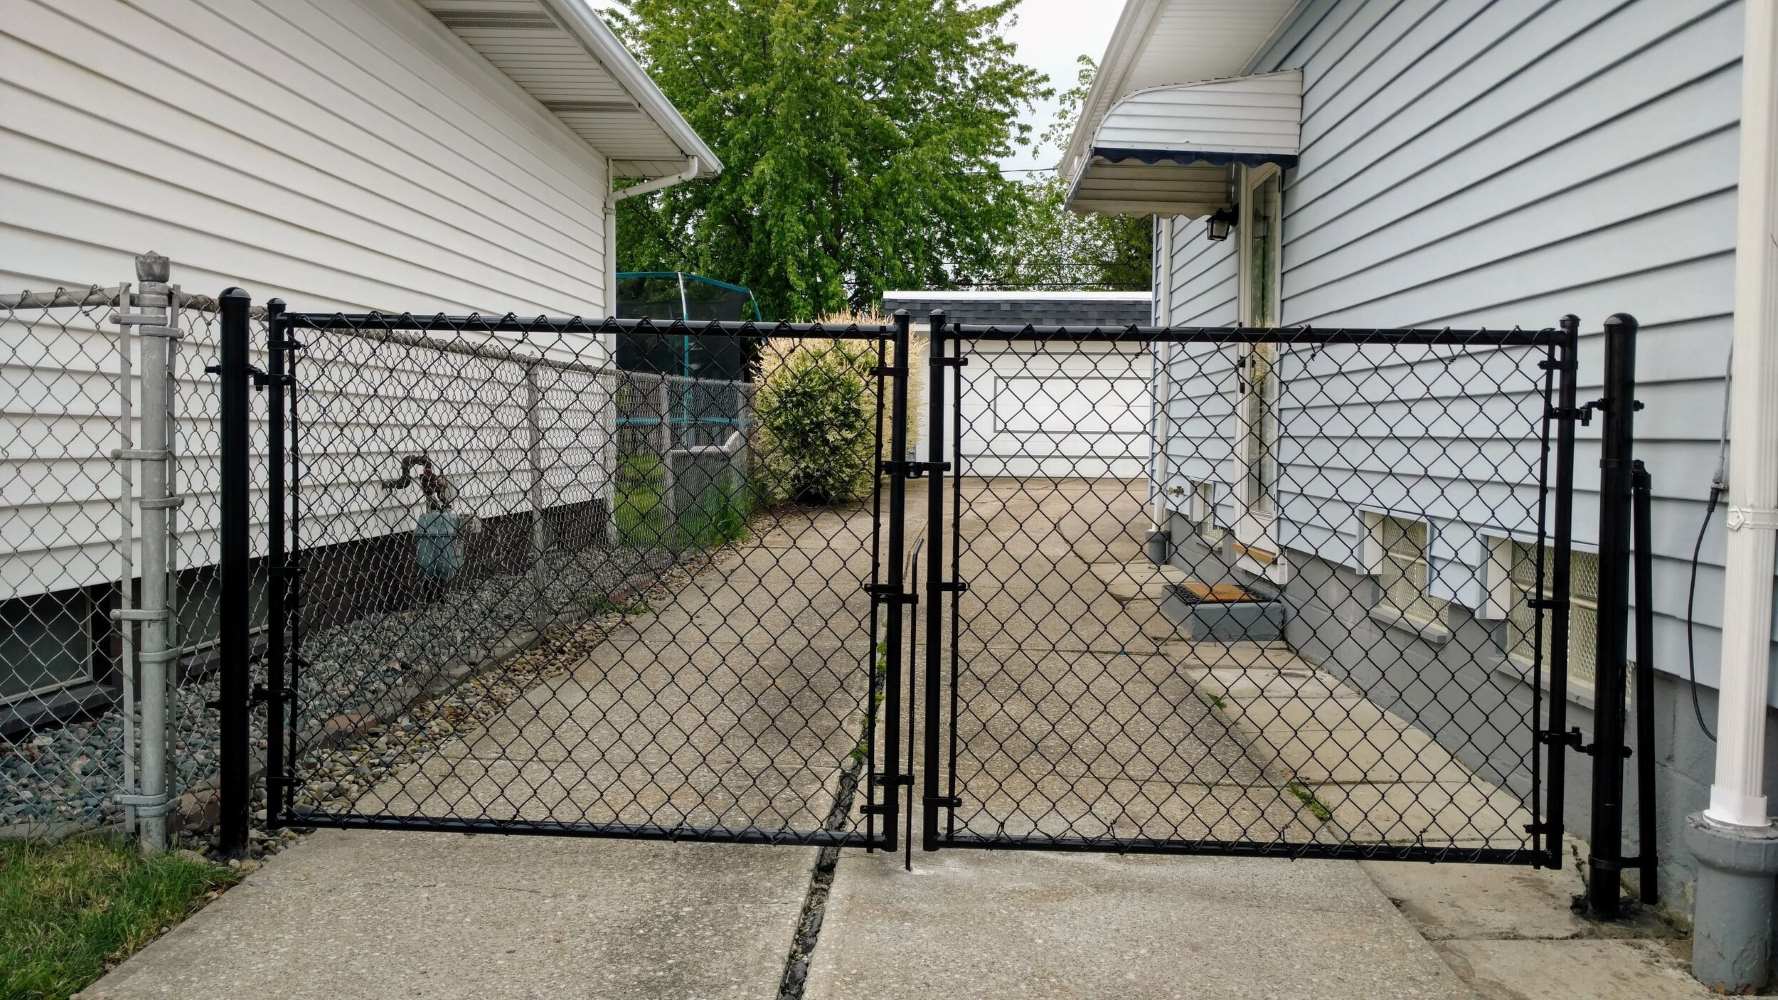 How To Build A Chain Link Gate